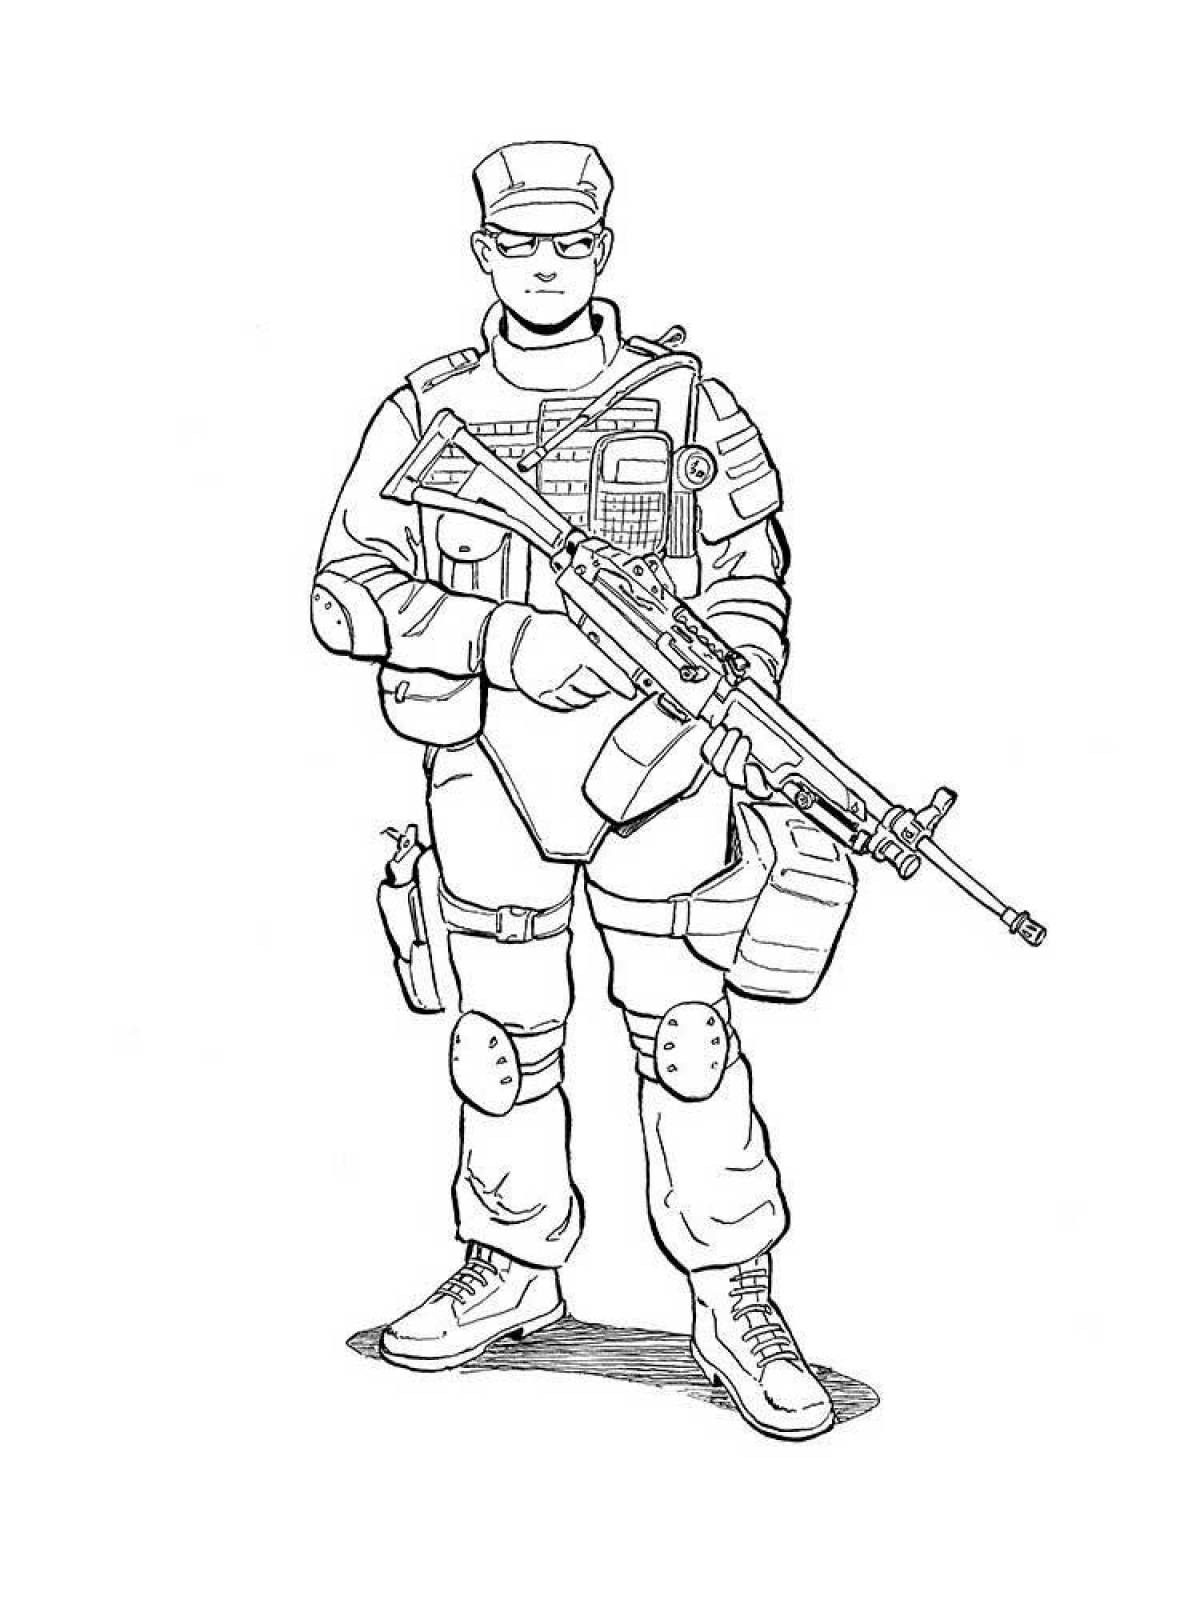 Amazing special forces coloring page